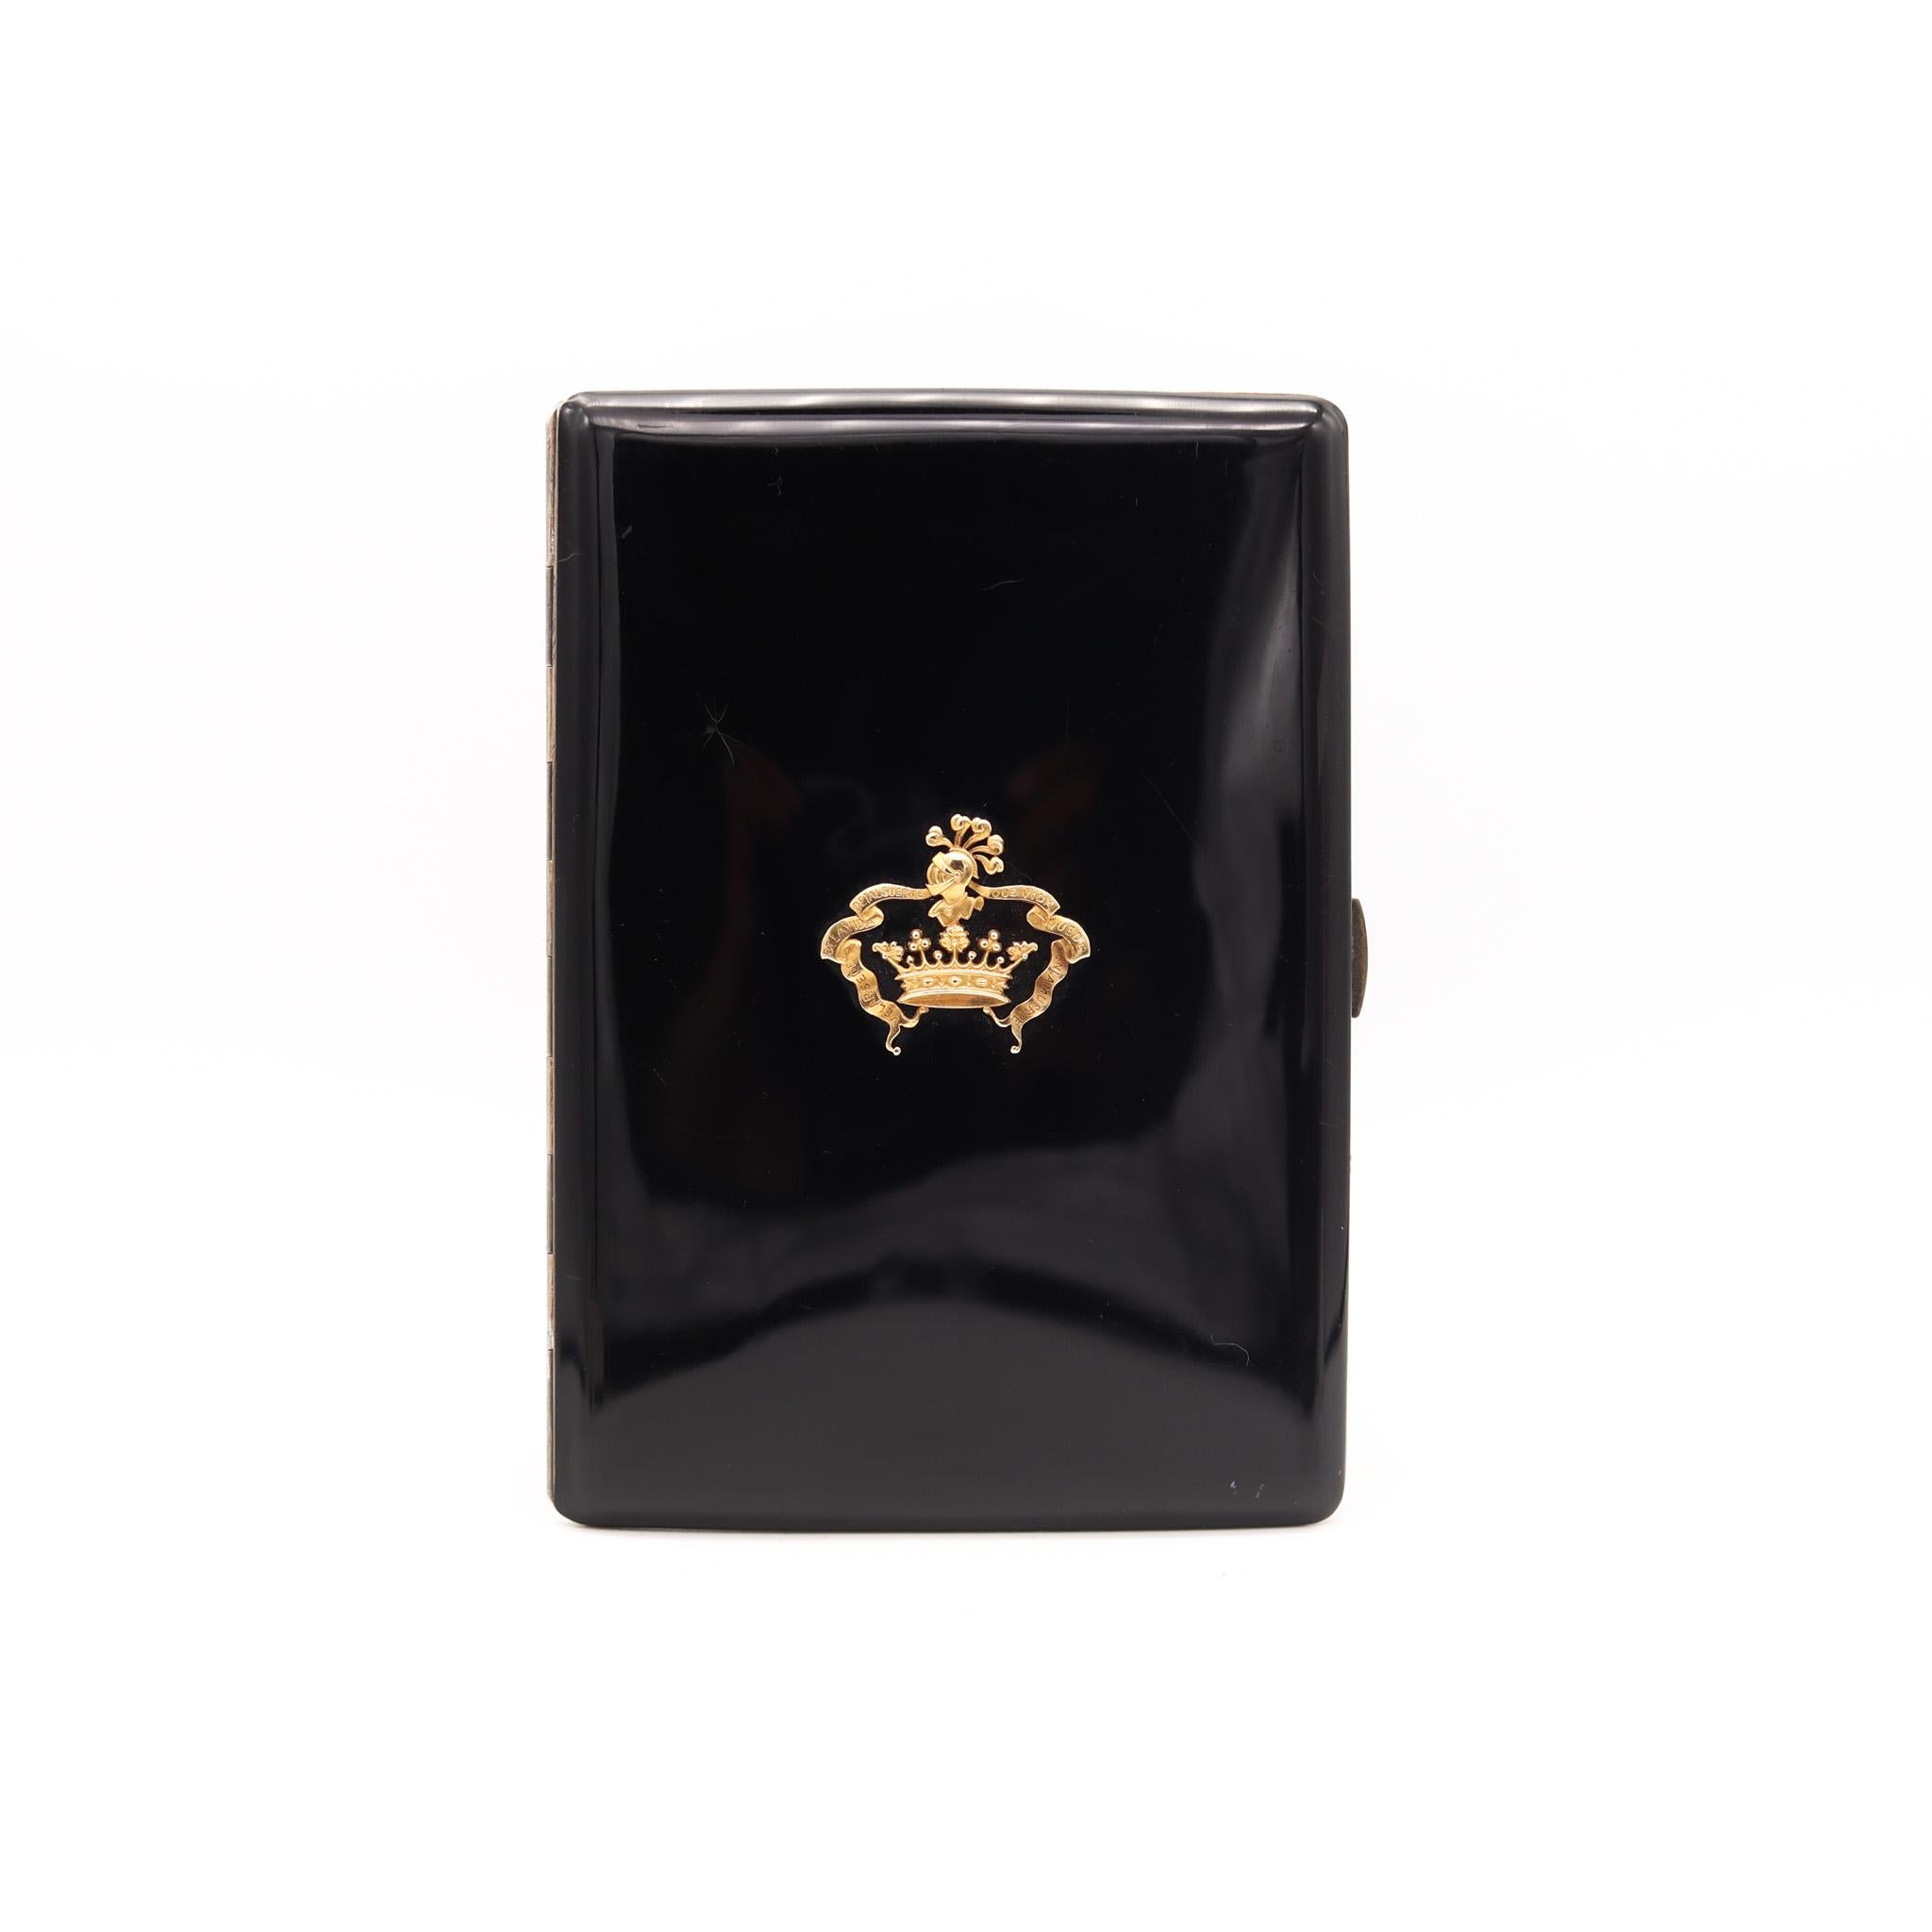 French lacquered case with the crest of the Zorrilla Family.

Magnificent cigarette case holder, created in Paris France, back in the 1929. Crafted at the atelier of the goldsmith Paul Delahais in solid .950/.999 sterling silver with gilded